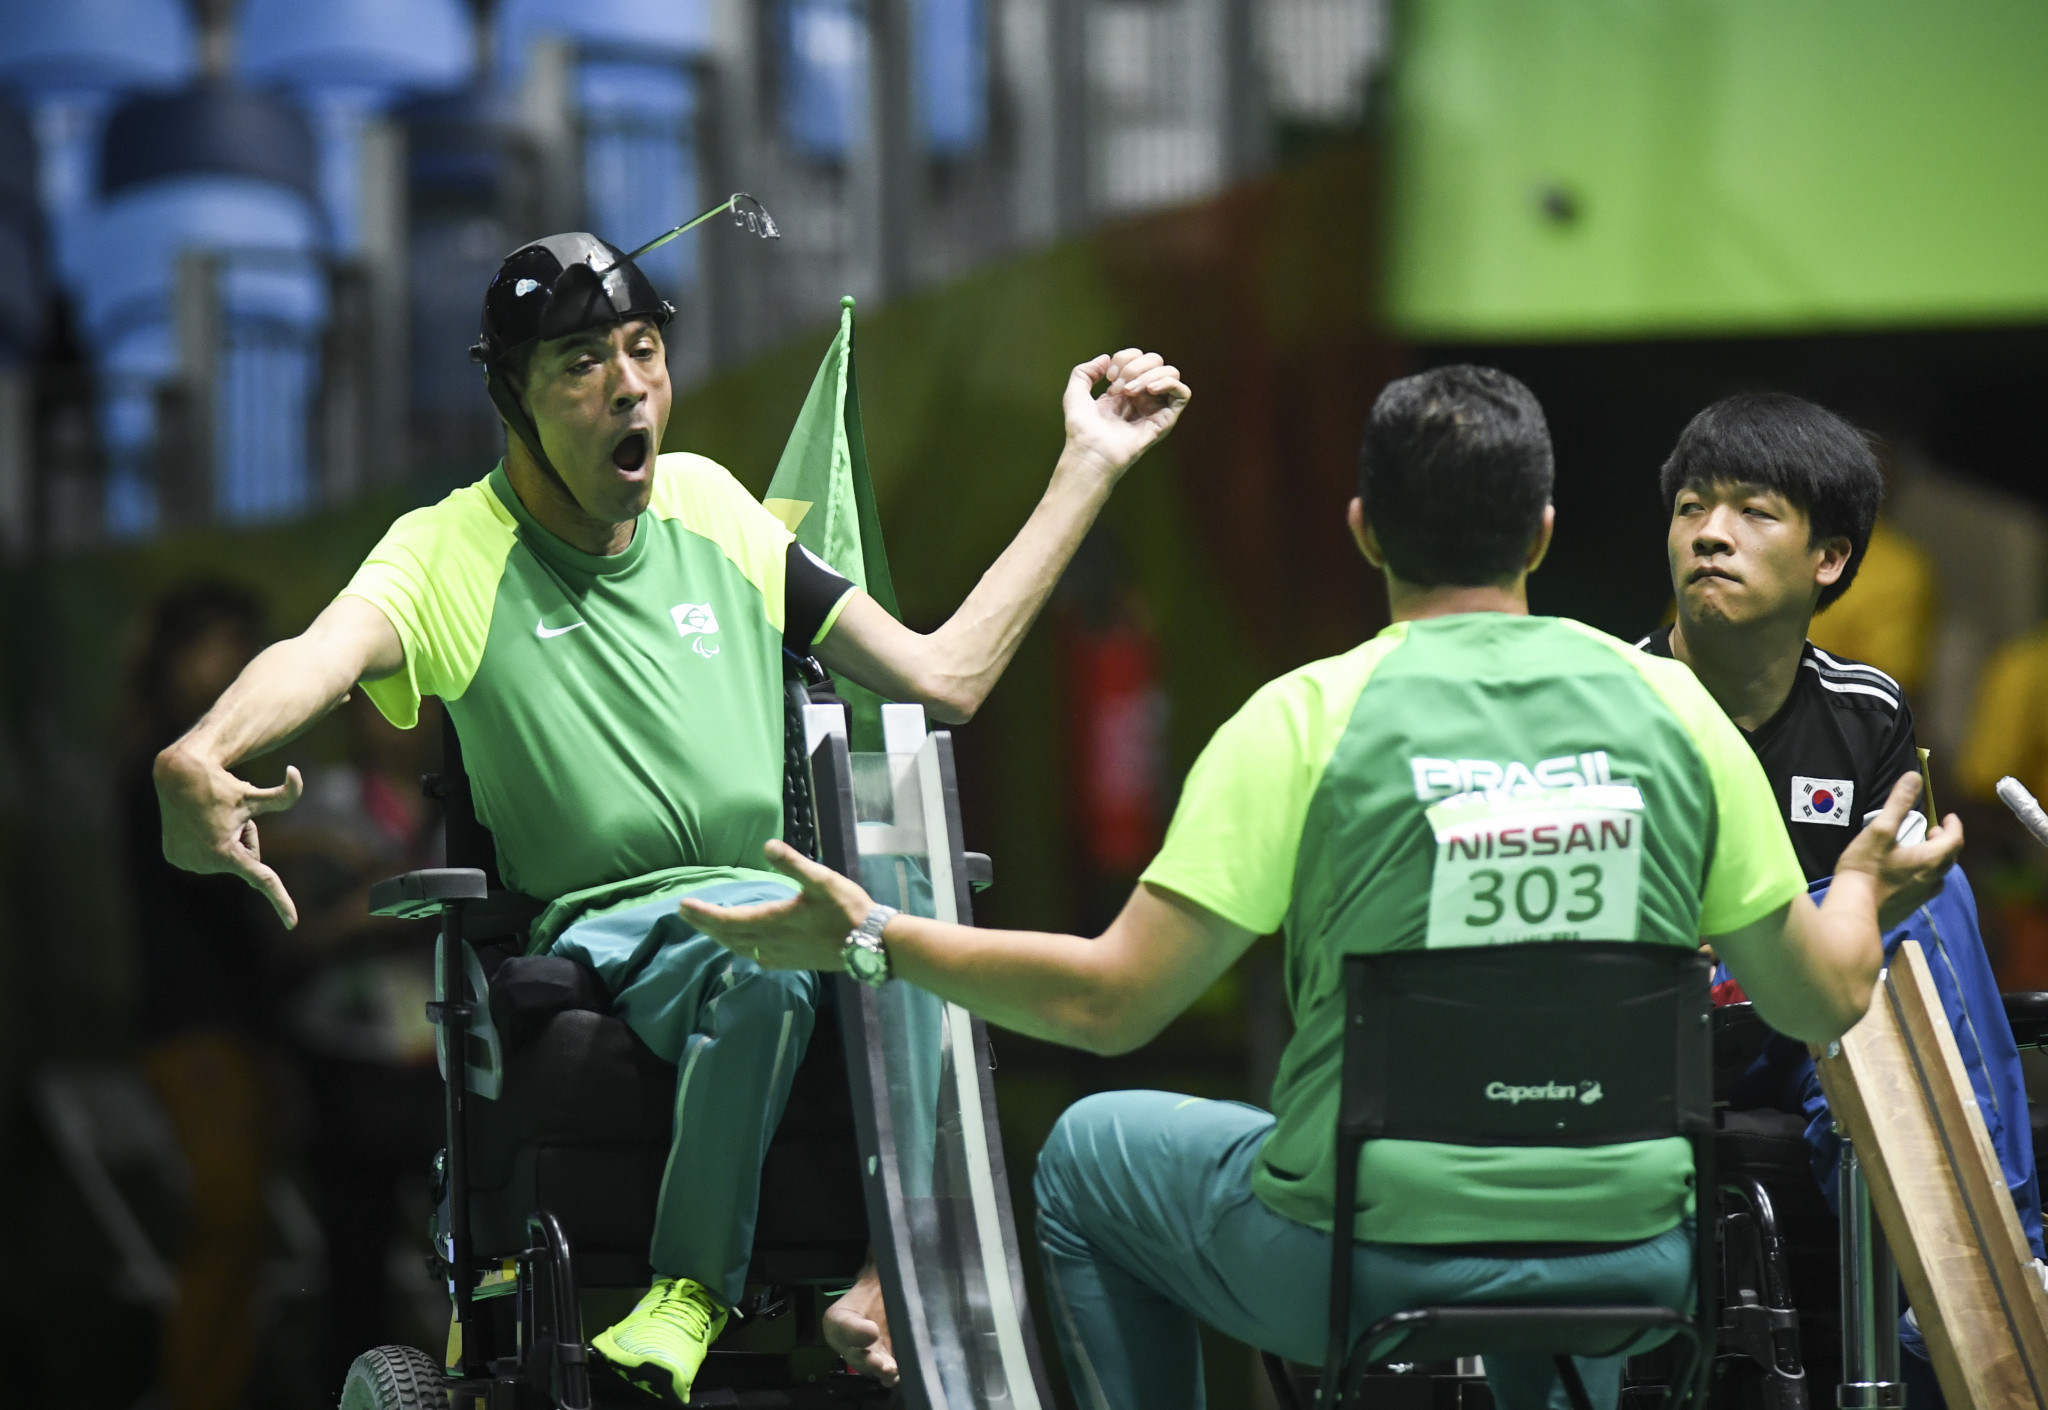 The Boccia International Sports Federation is the world governing body for the Paralympic sport ©BISFed